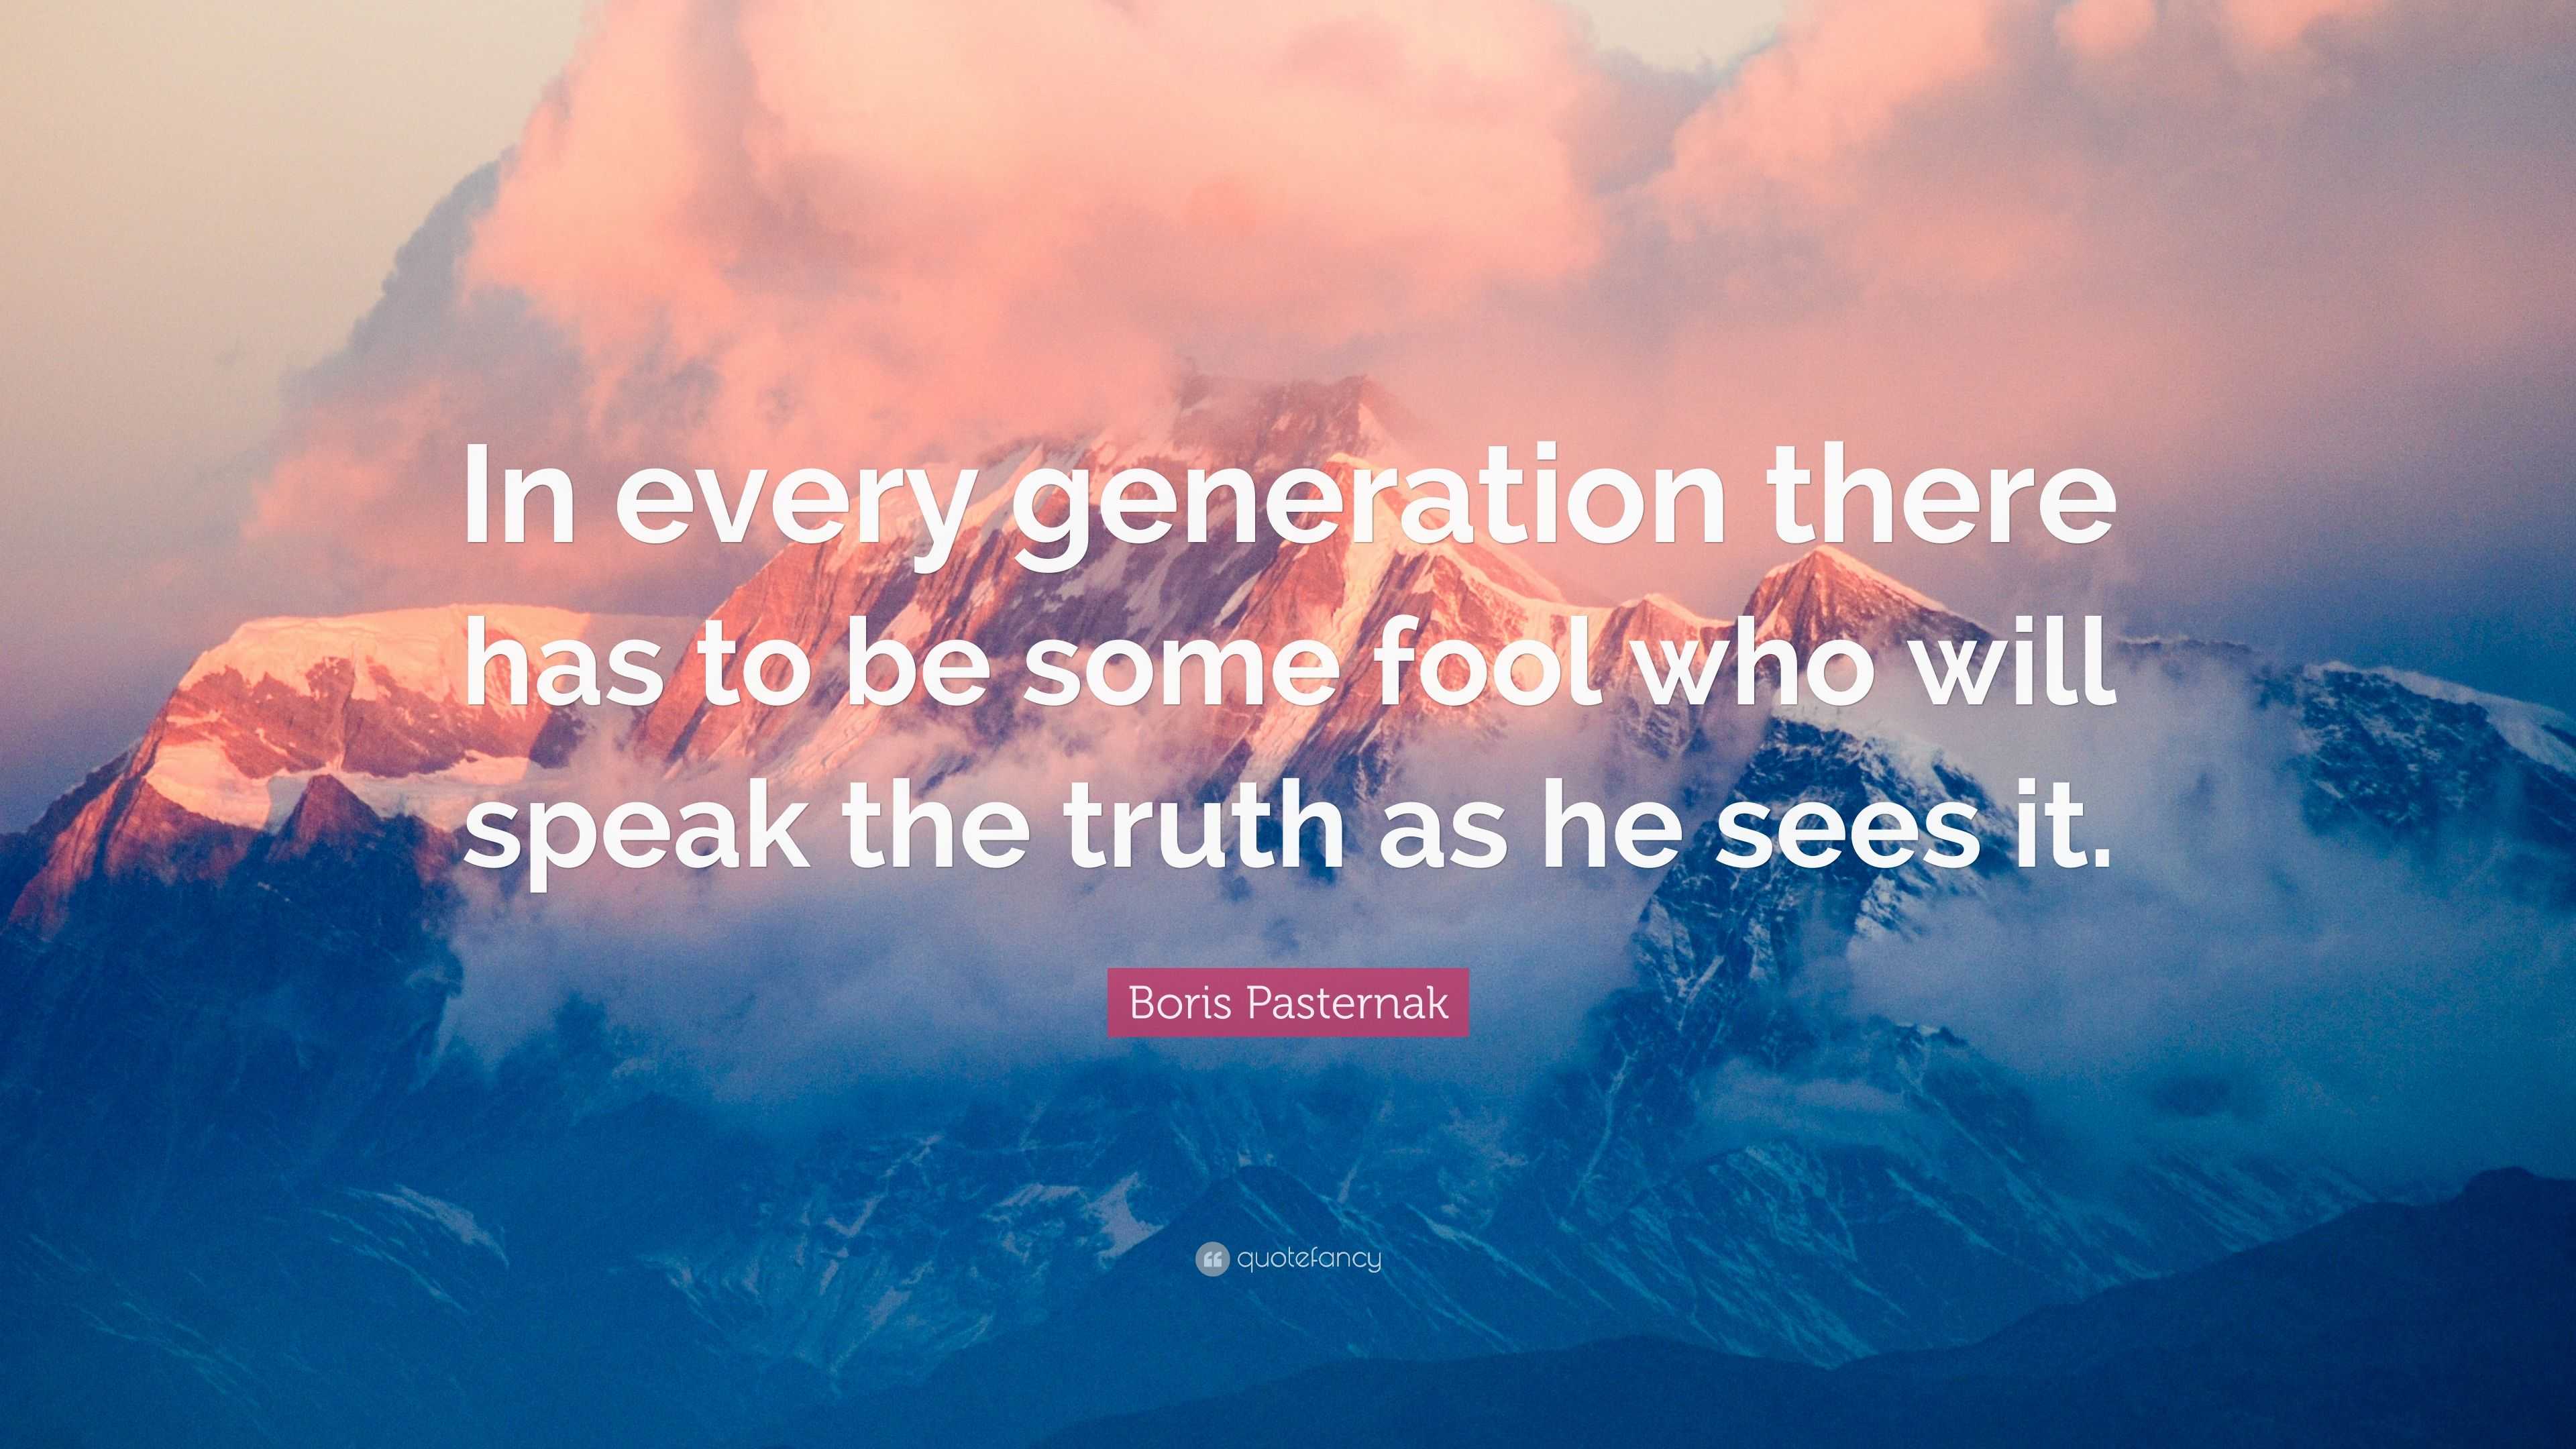 Boris Pasternak Quote: “In every generation there has to be some fool who will speak